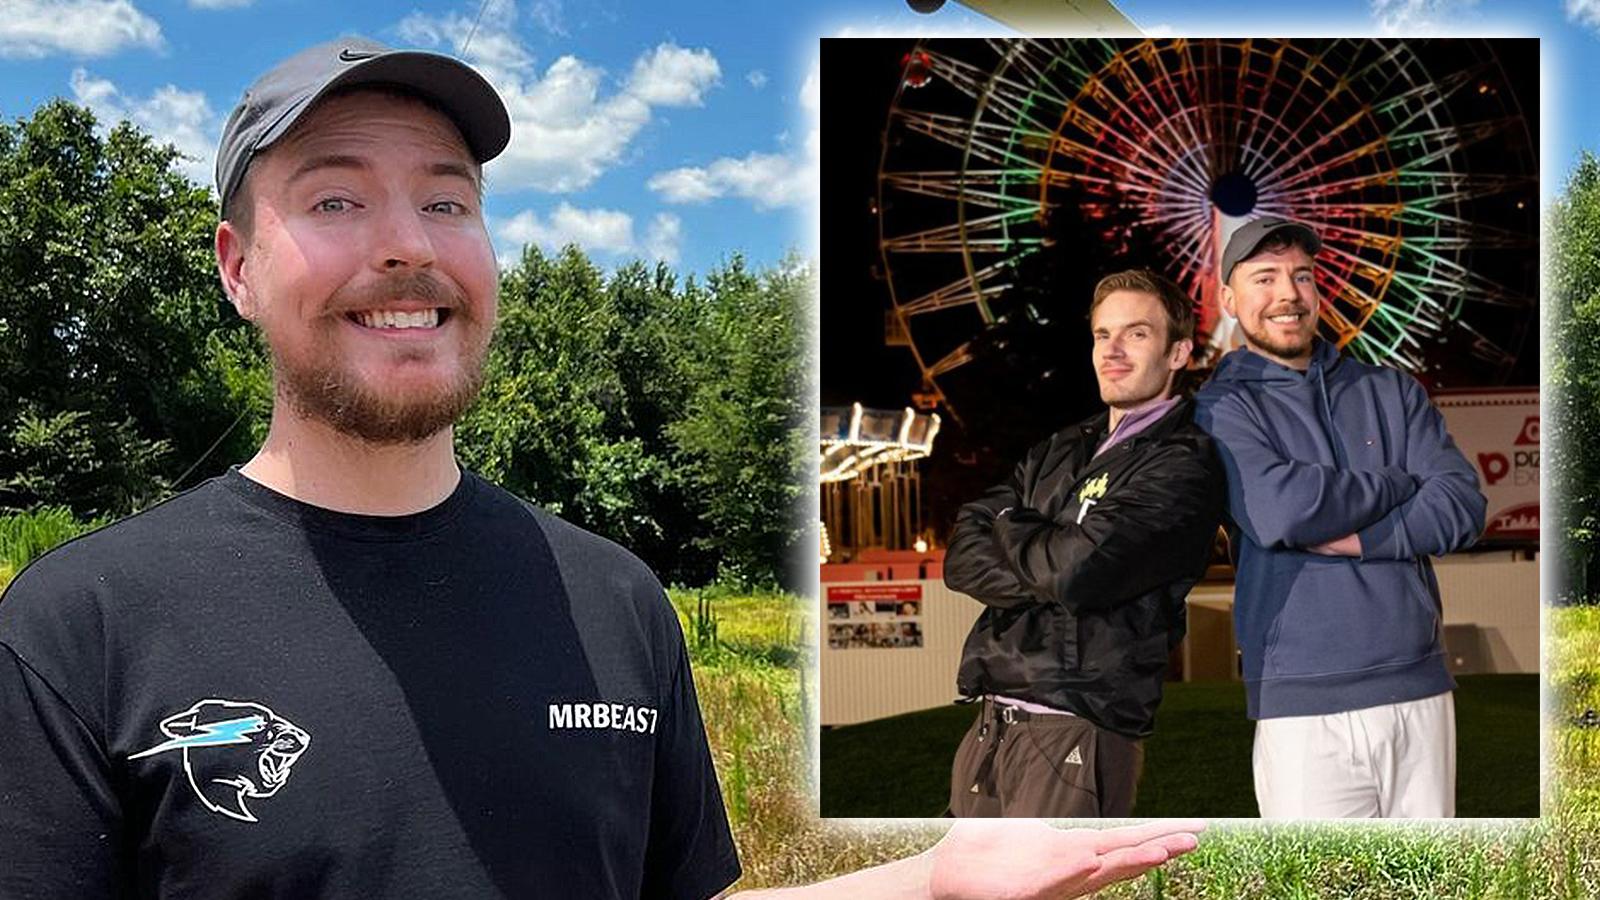 Who Is MrBeast? Meet the r Who Wants to Change the World